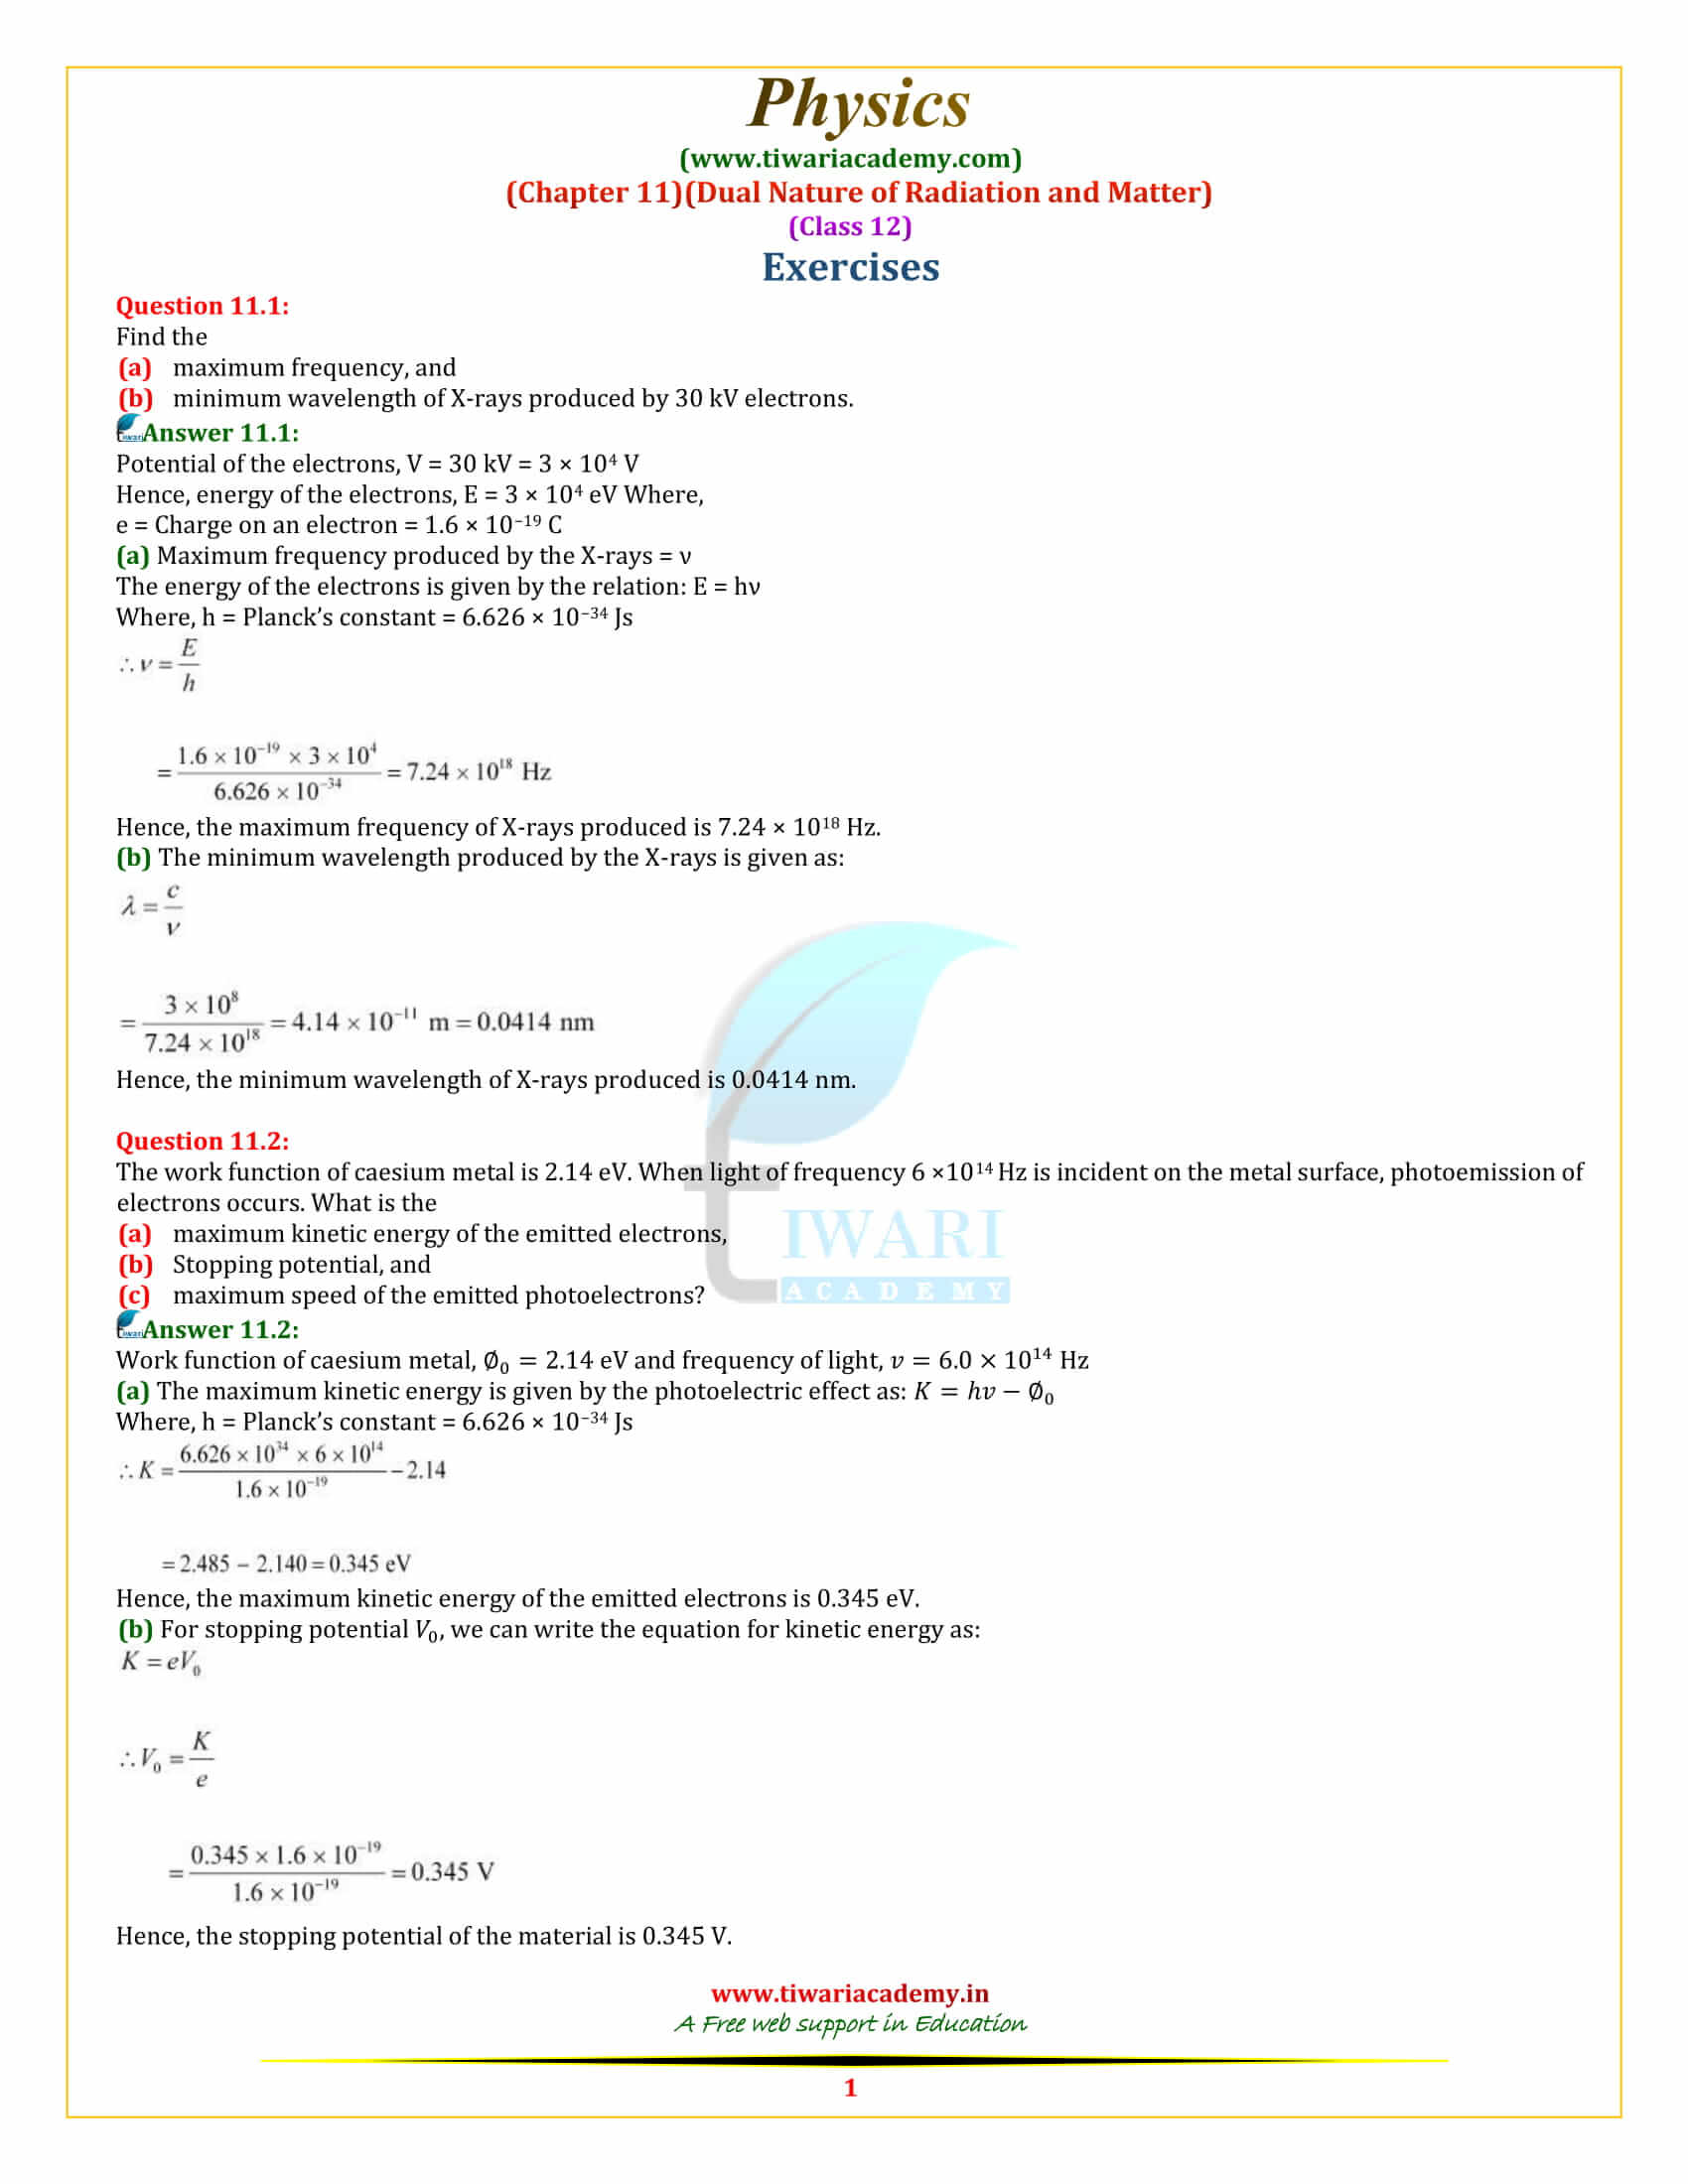 NCERT Solutions for Class 12 Physics Chapter 11 Dual Nature of Radiation and Matter